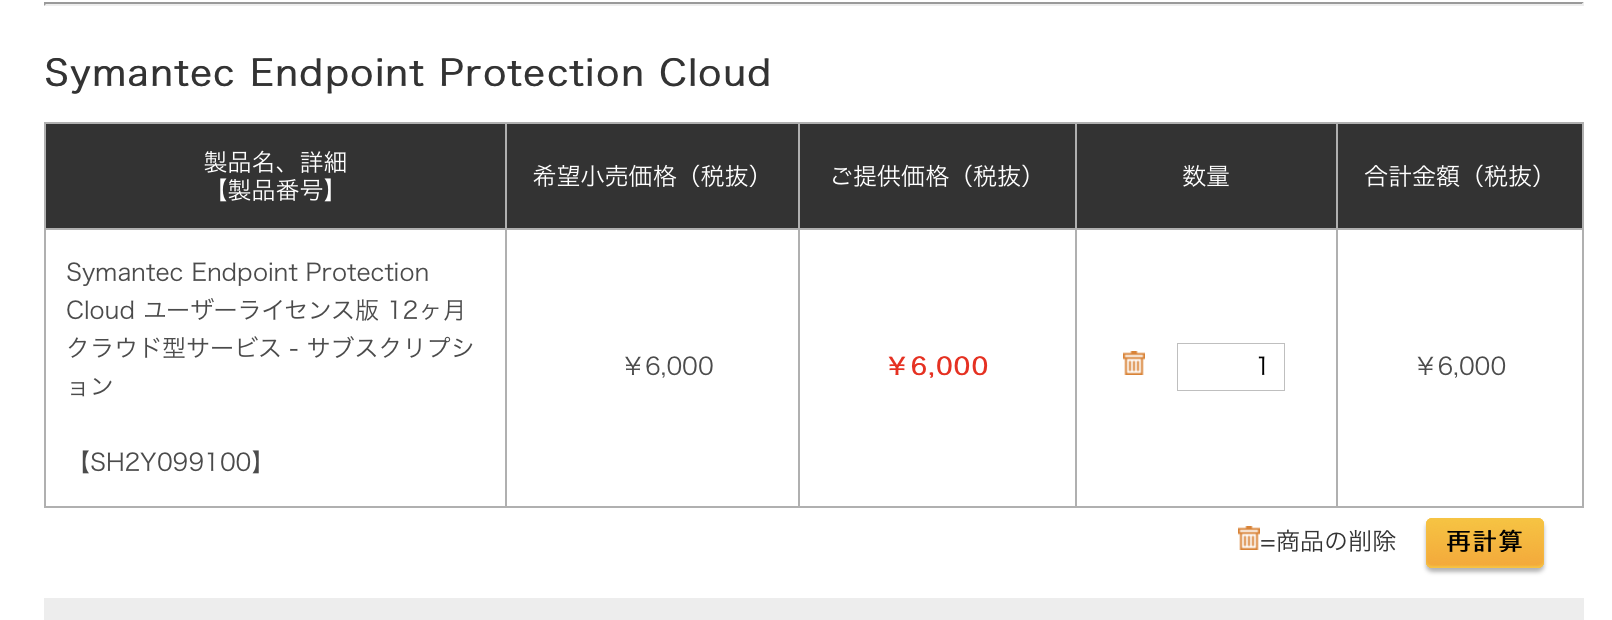 symantec endpoint protection 14 price